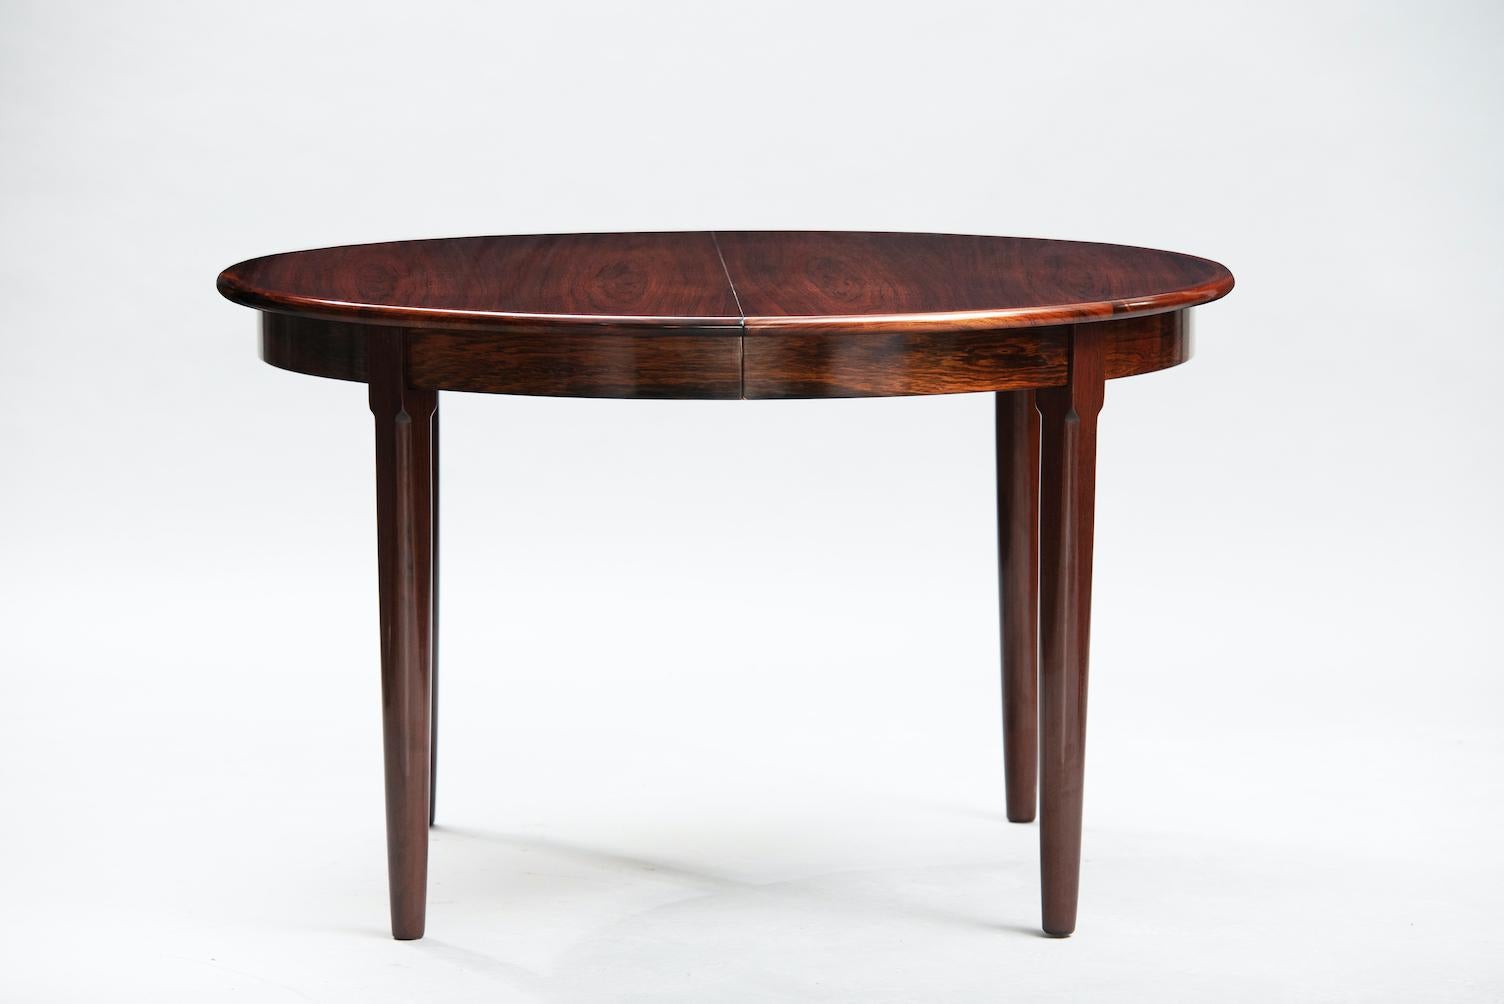 Varnished Rosewood Mid-Century Modern Danish Dining Table